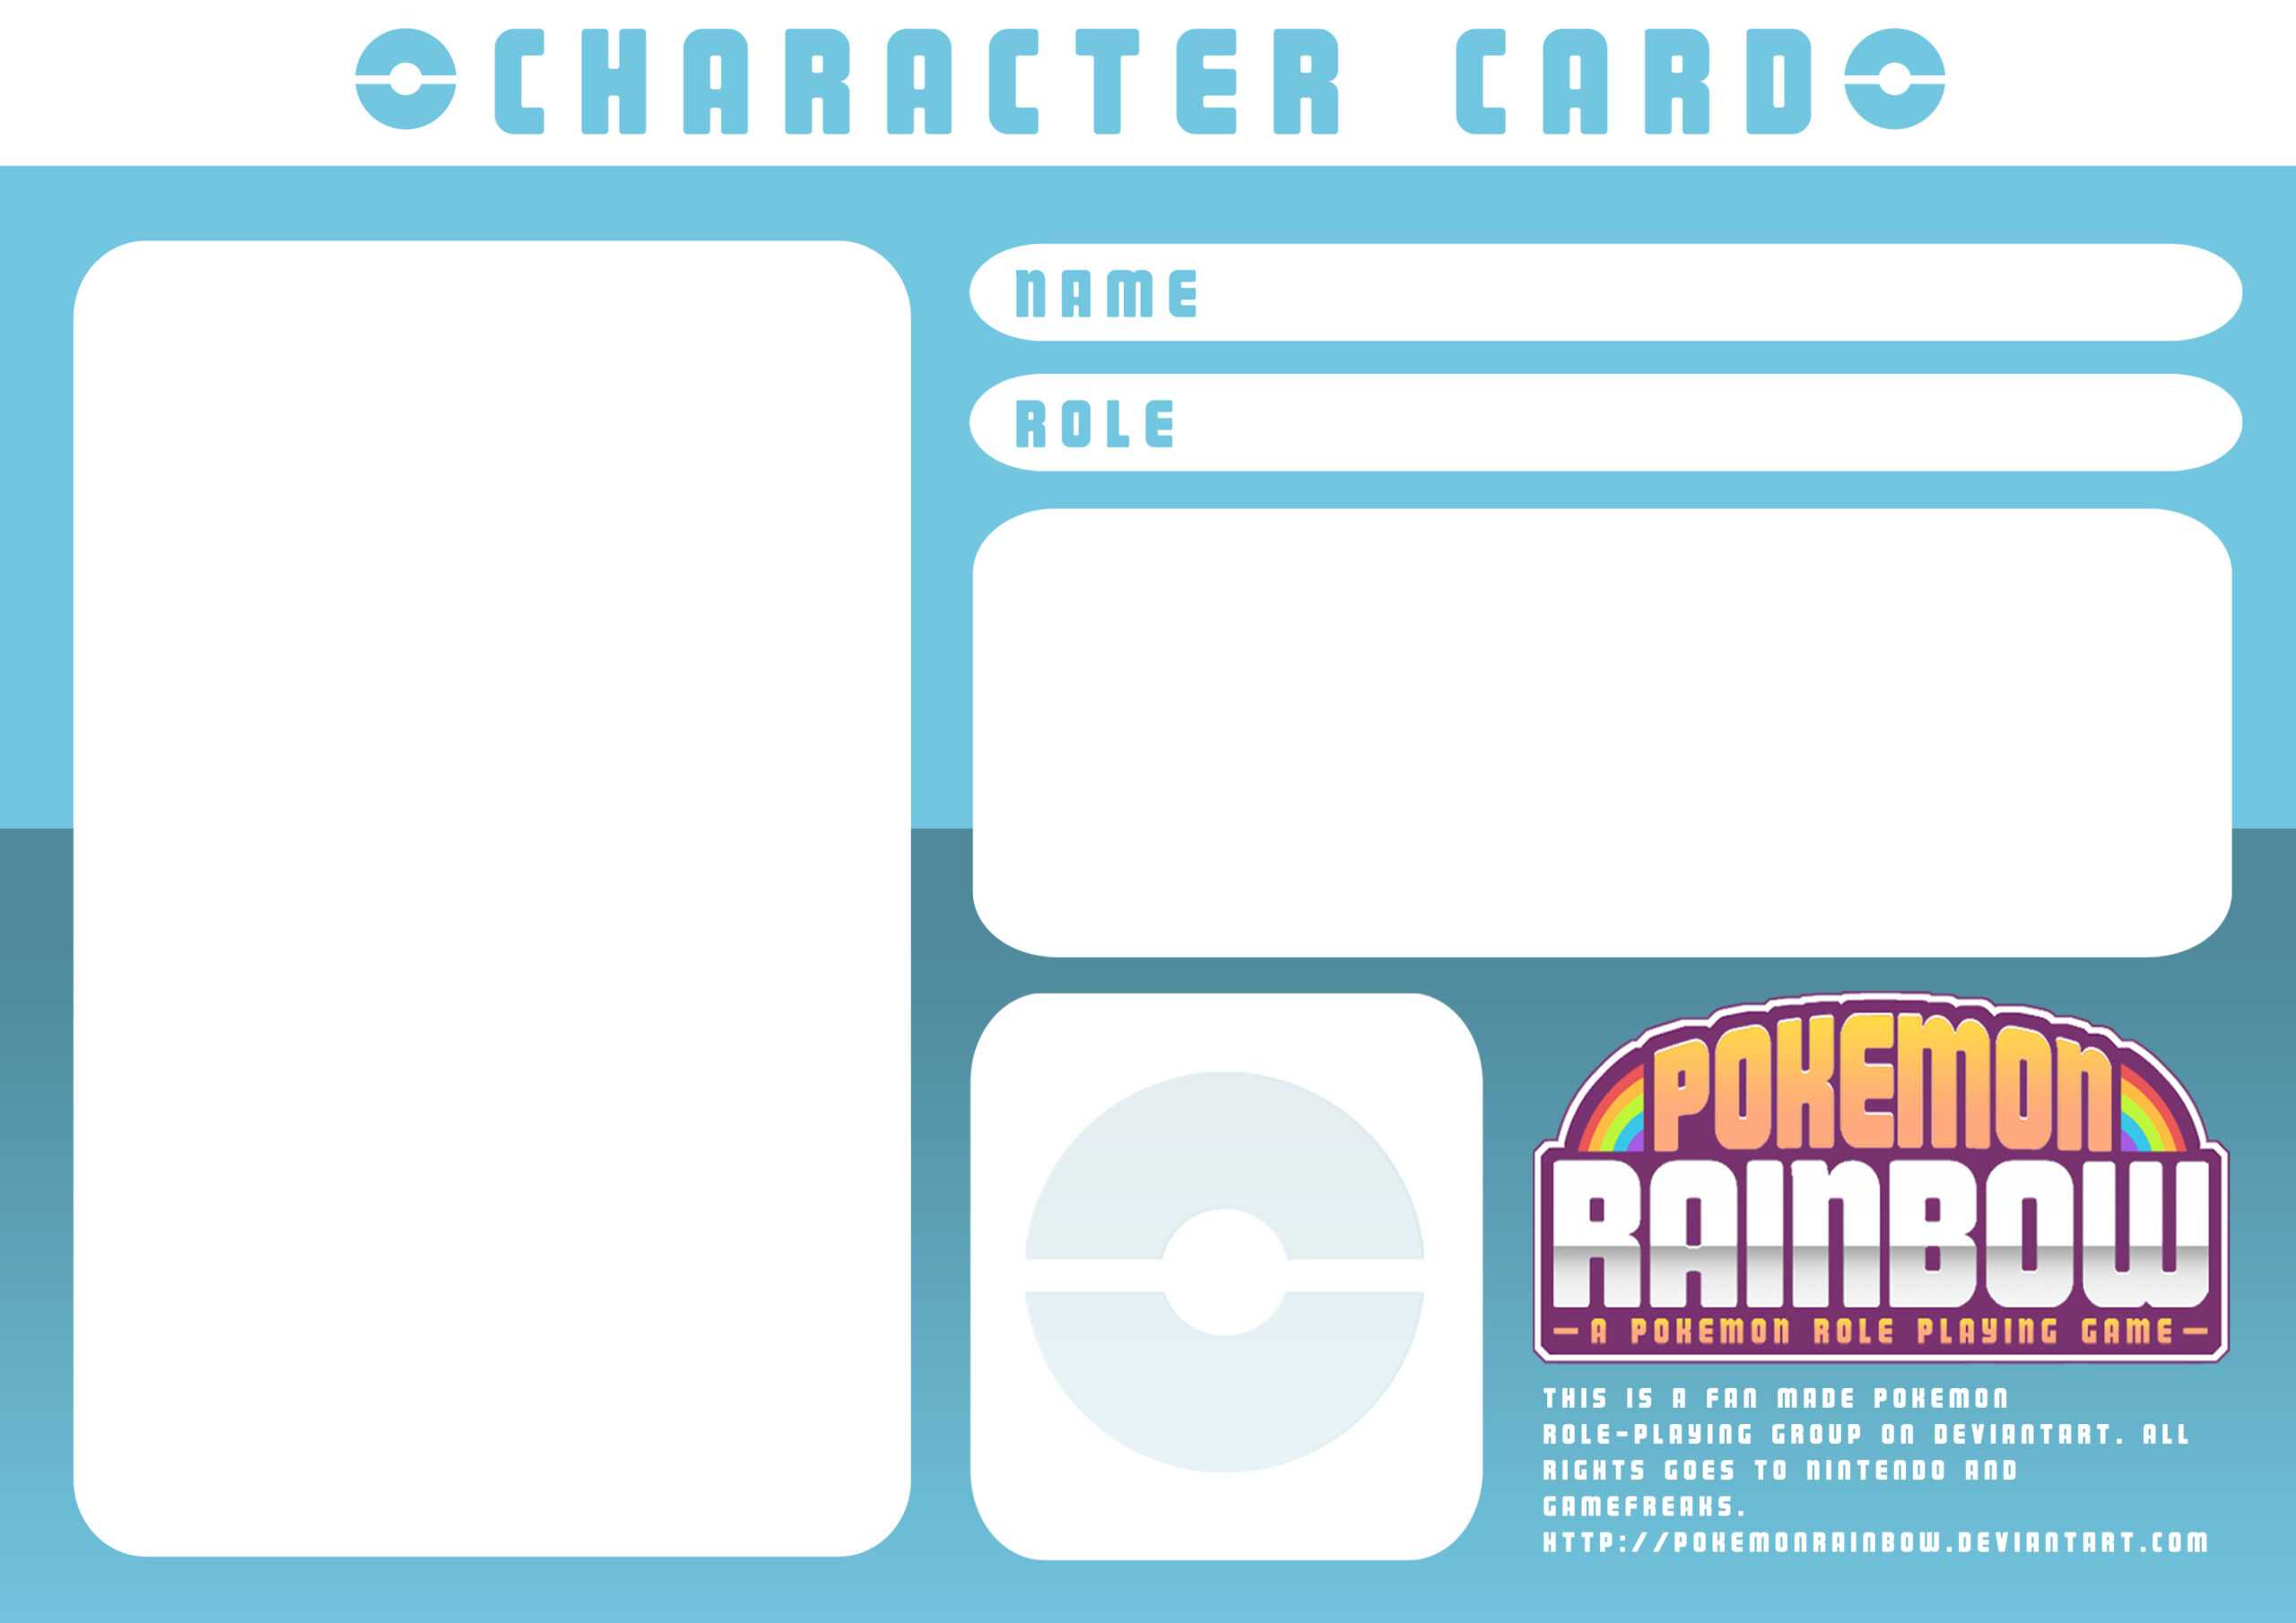 Character Card Templatery Spirit On Deviantart Throughout Pokemon Trainer Card Template